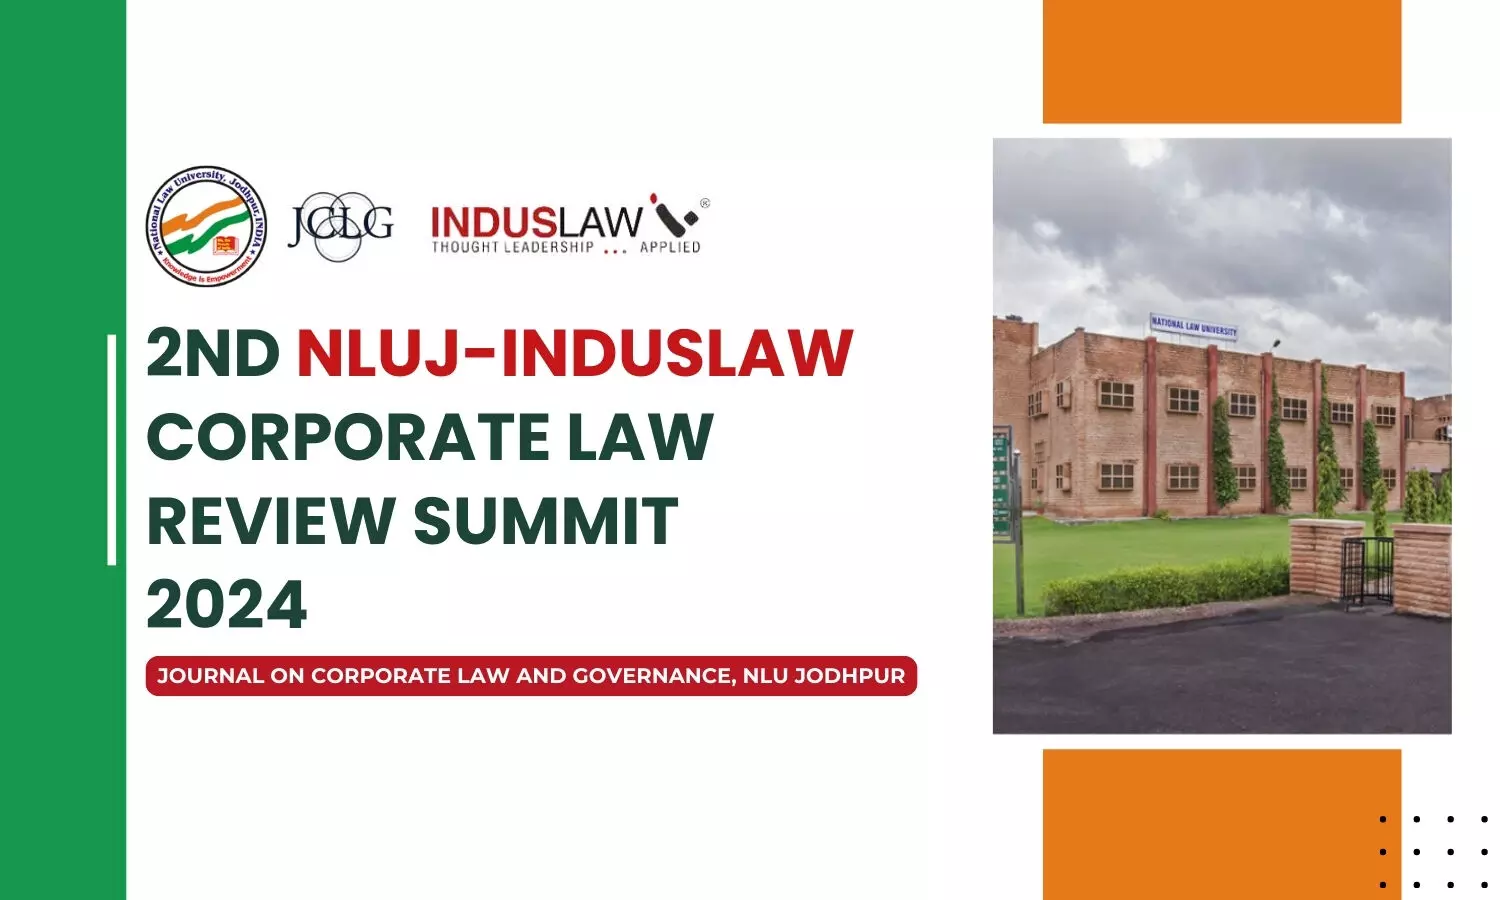 Call for Papers: 2nd NLUJ-INDUSLAW Corporate Law Review Summit 2024